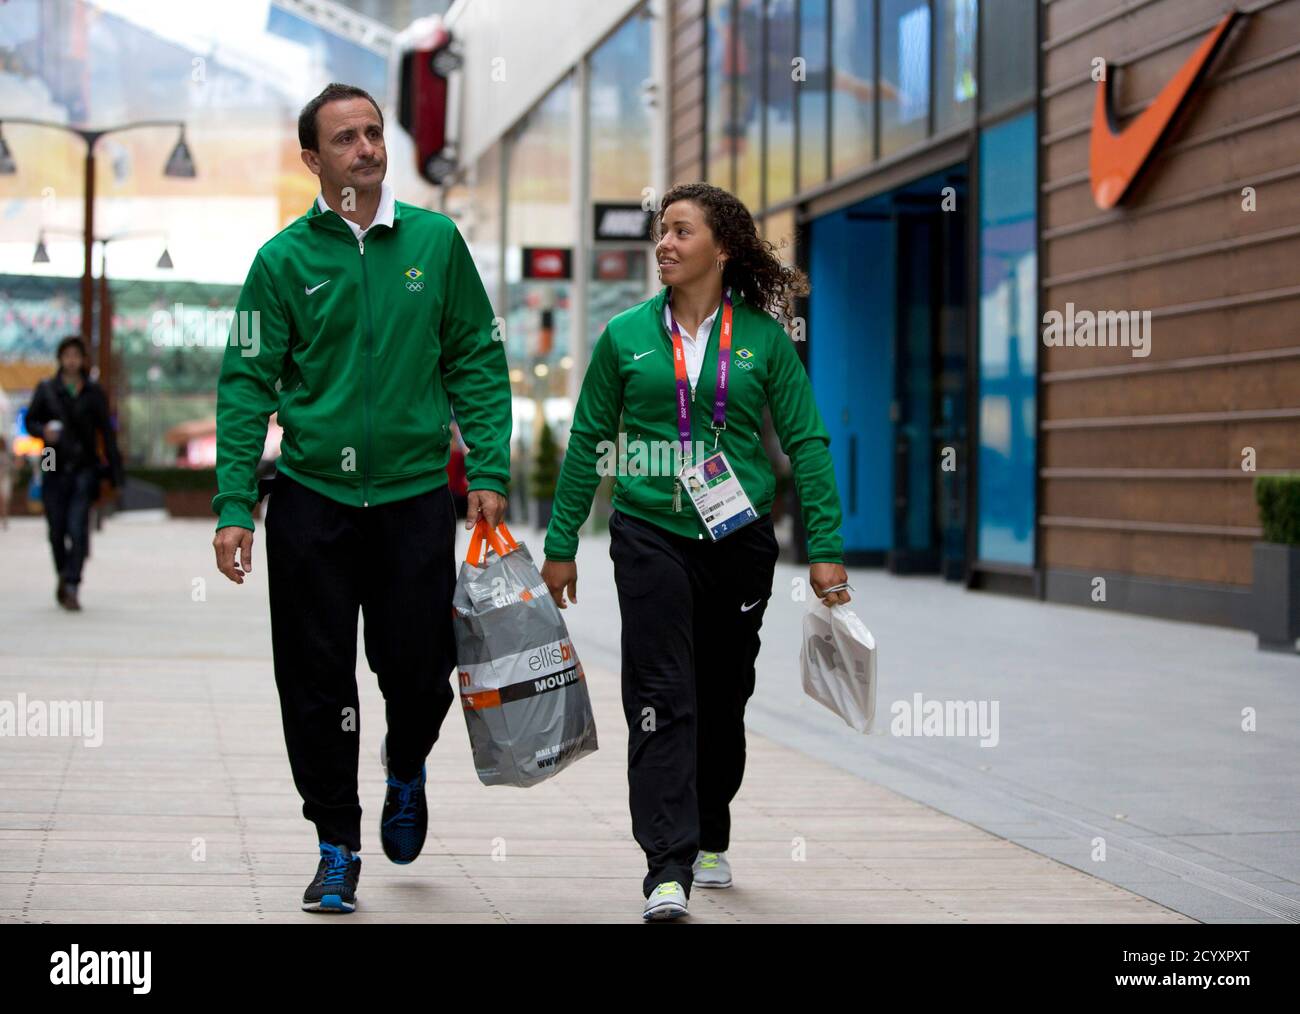 Members of the Brazilian Olympic Team walk in the Westfield Shopping Centre, a major gateway for visitors to the London 2012 Olympic Park, in Stratford, east London, July 19, 2012. REUTERS/Neil Hall (BRITAIN - Tags: SPORT OLYMPICS) Stock Photo